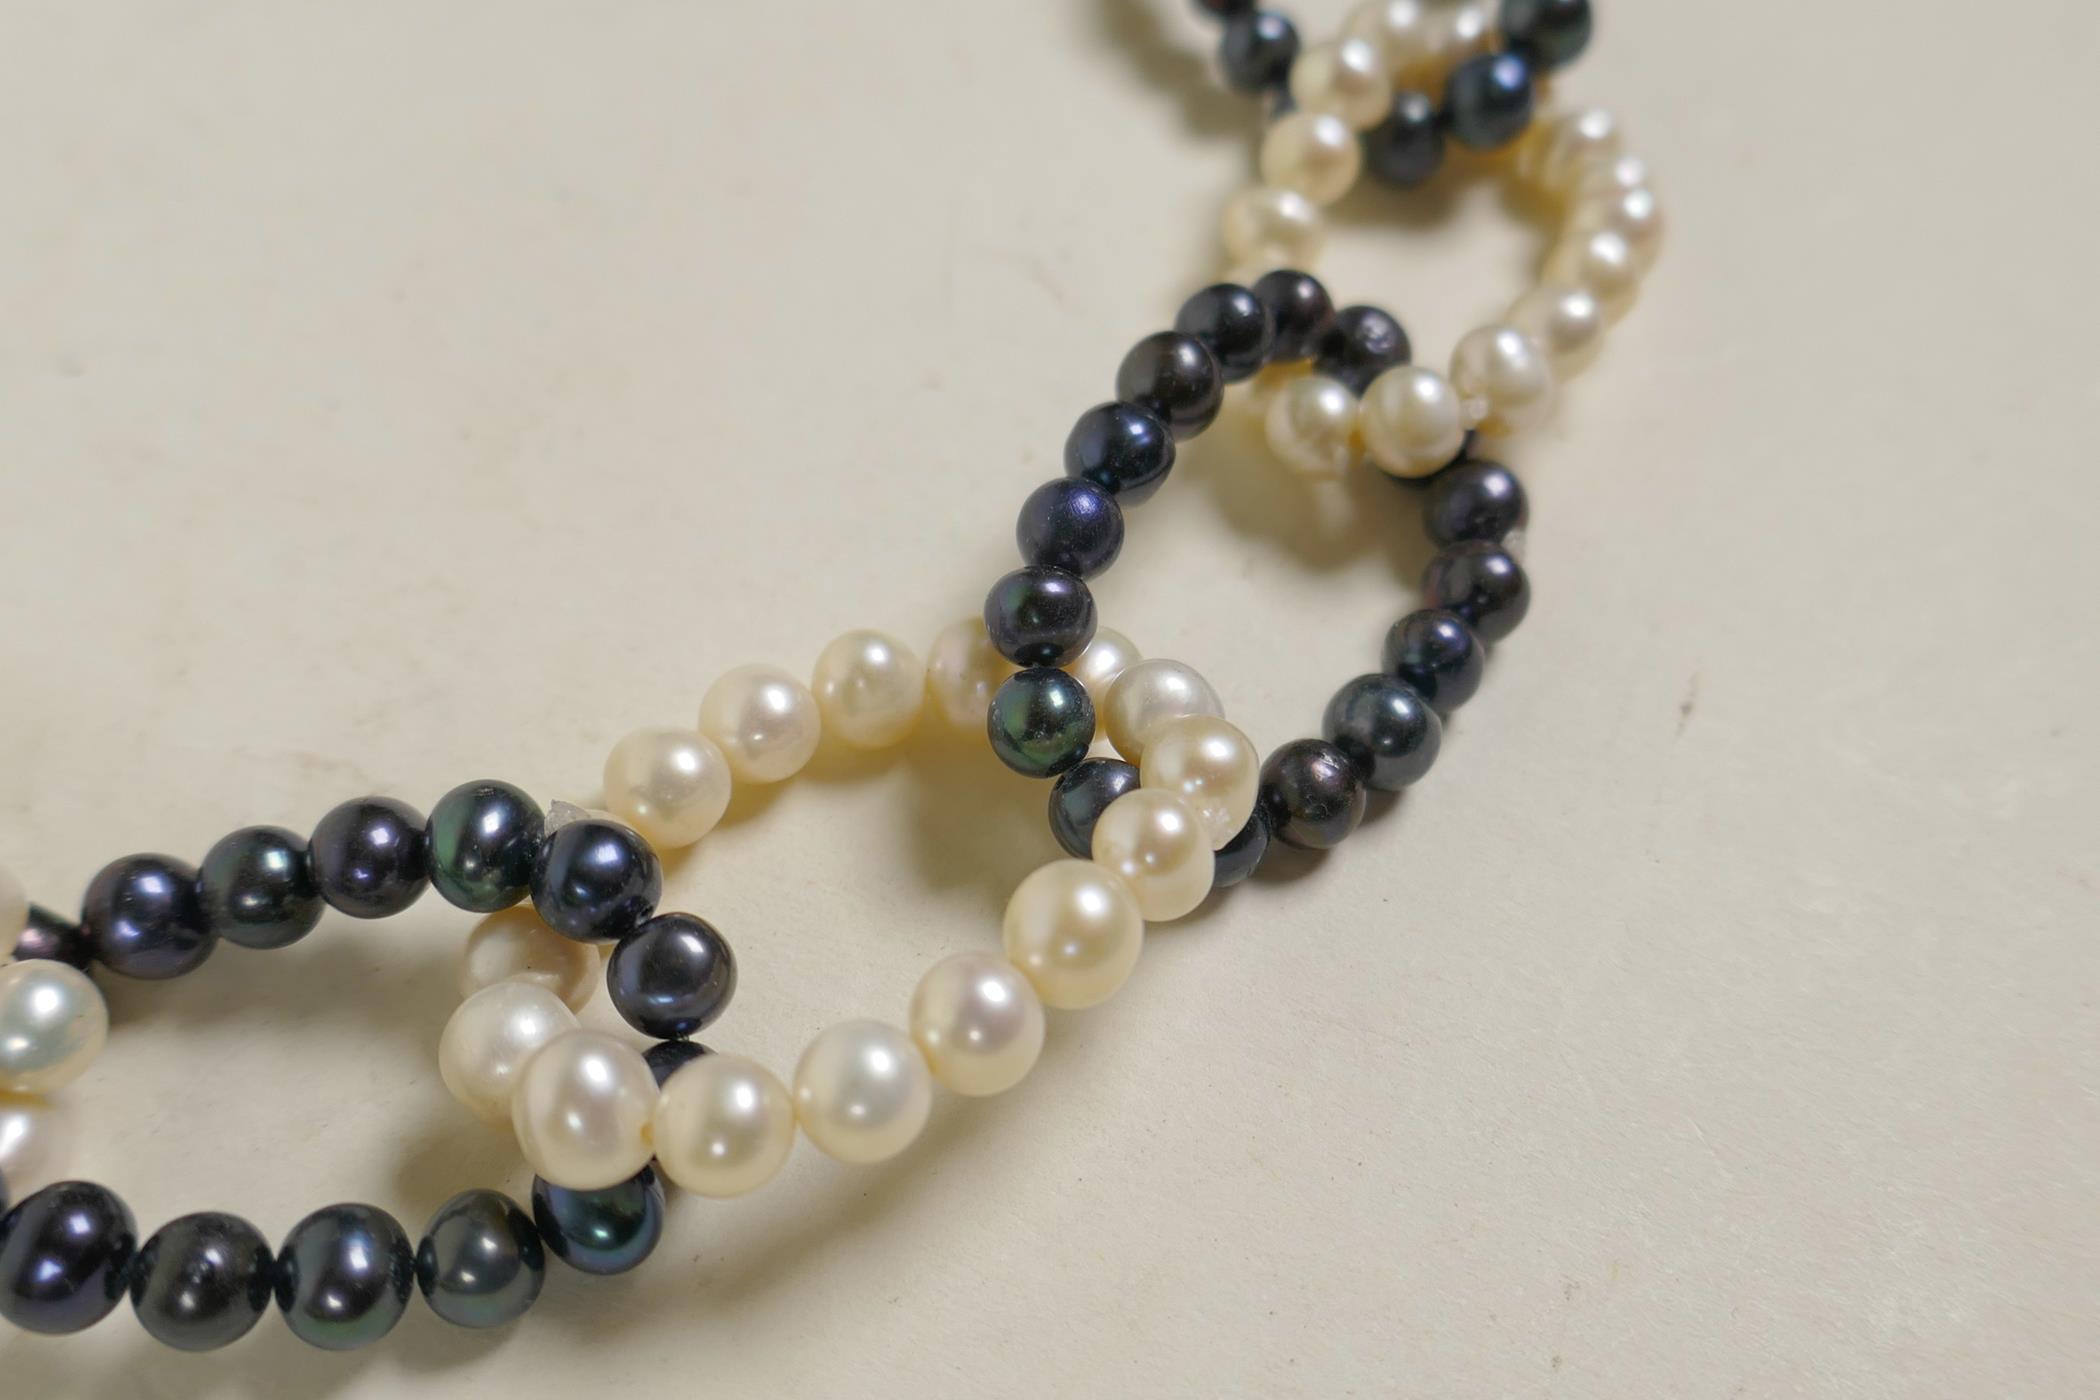 A Tahitian black and white pearl chain link necklace, 28" long - Image 2 of 2